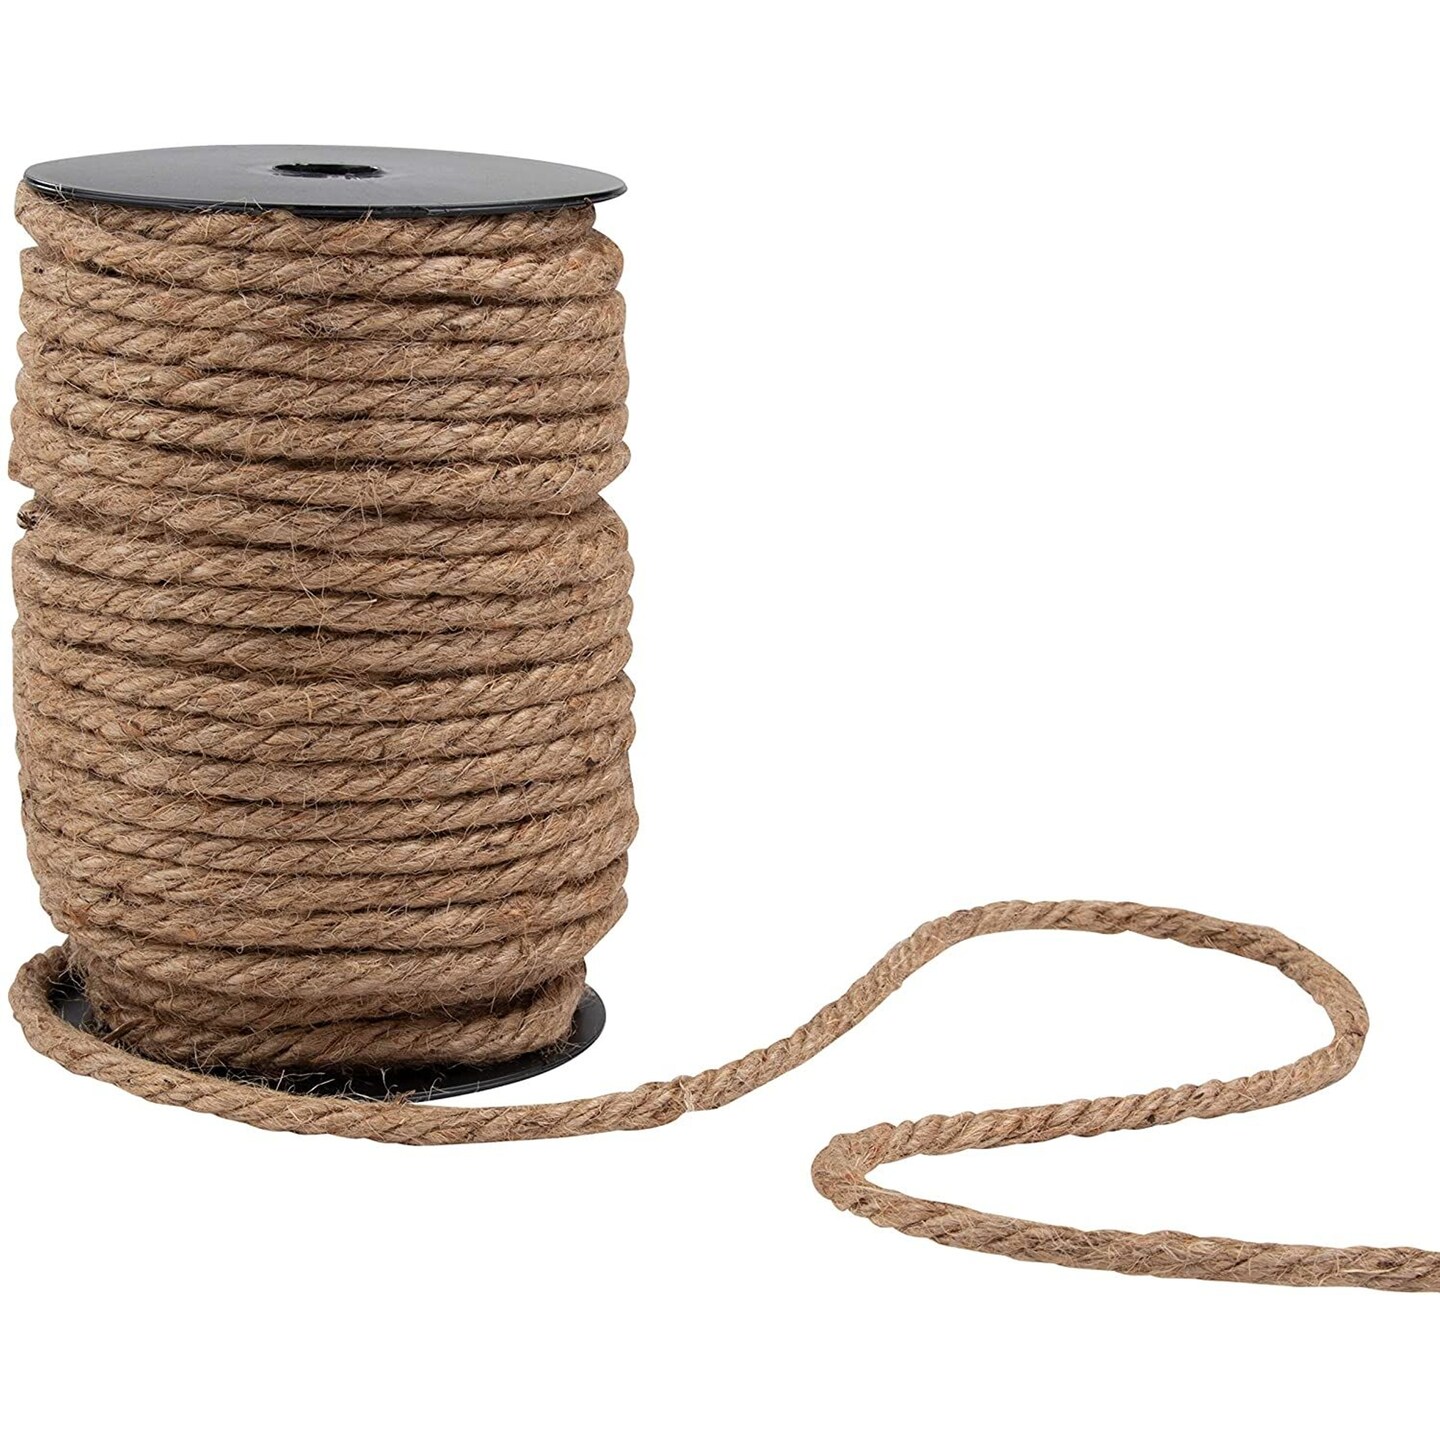 Artskills Project Craft Skein of 3-Ply Brown Jute Twine Cord for Decor, 168 Yards Total, Gifts and Macrame (6-pack)